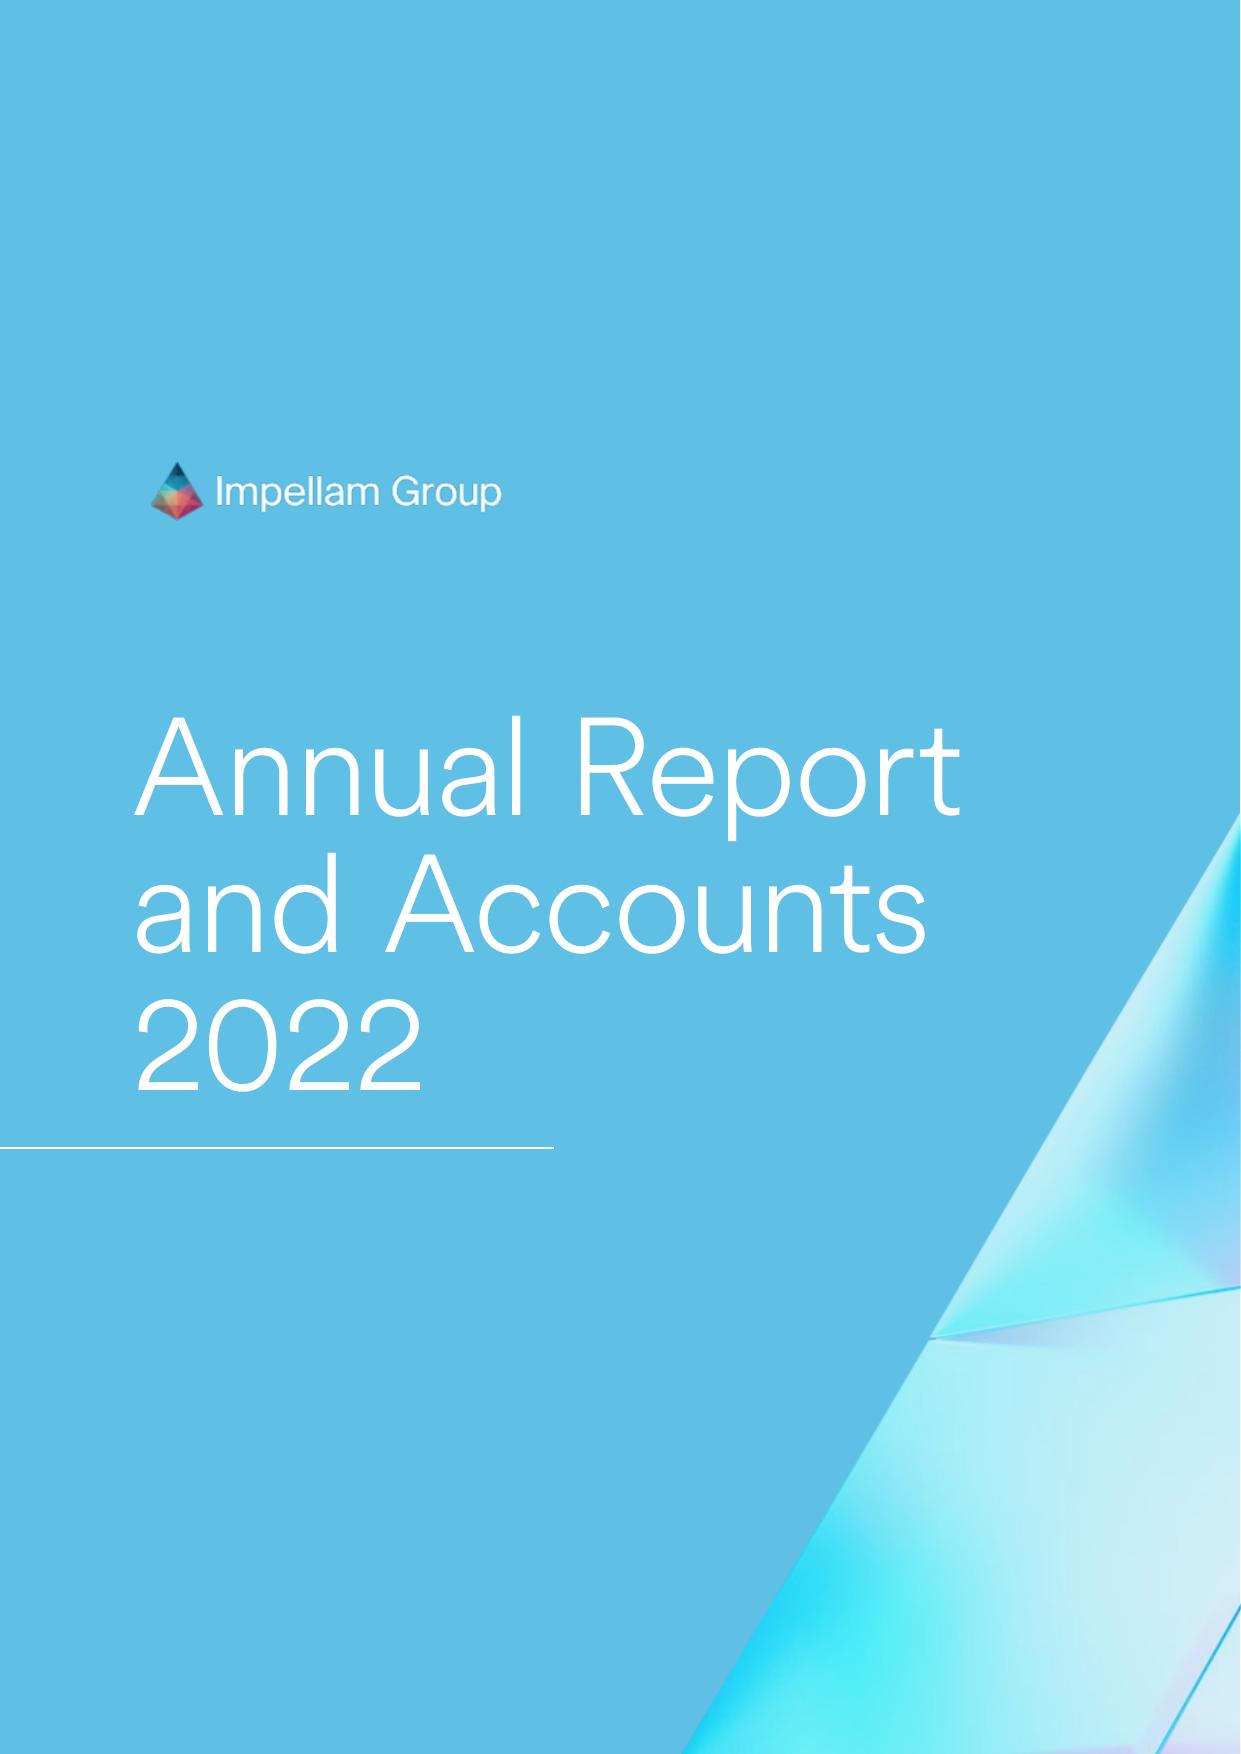 ISSGOVERNANCE 2022 Annual Report